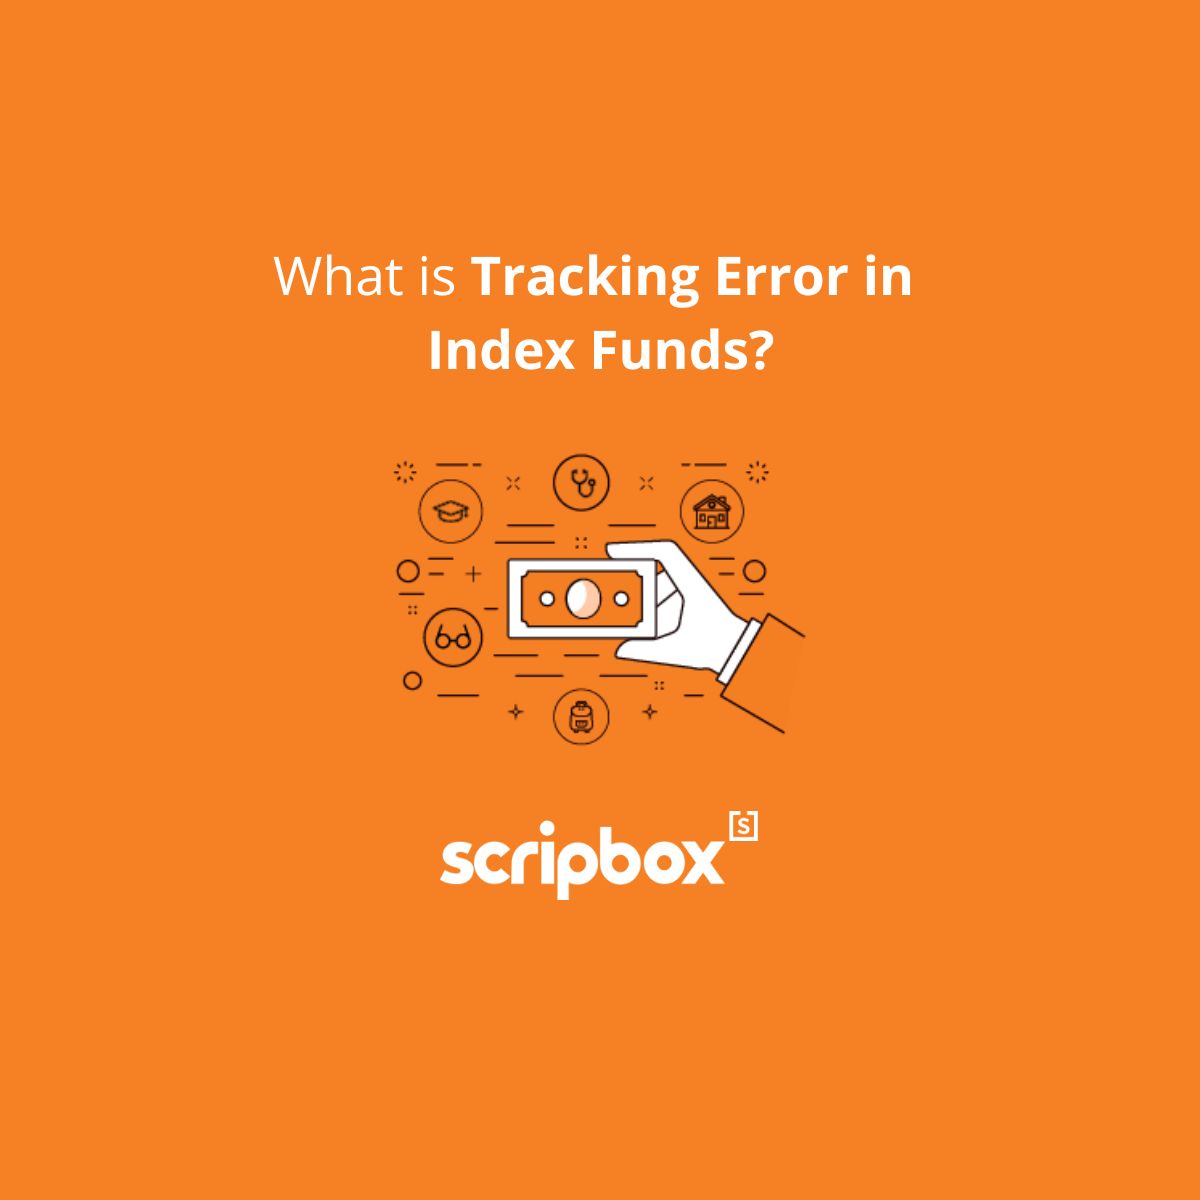 tracking error in index funds